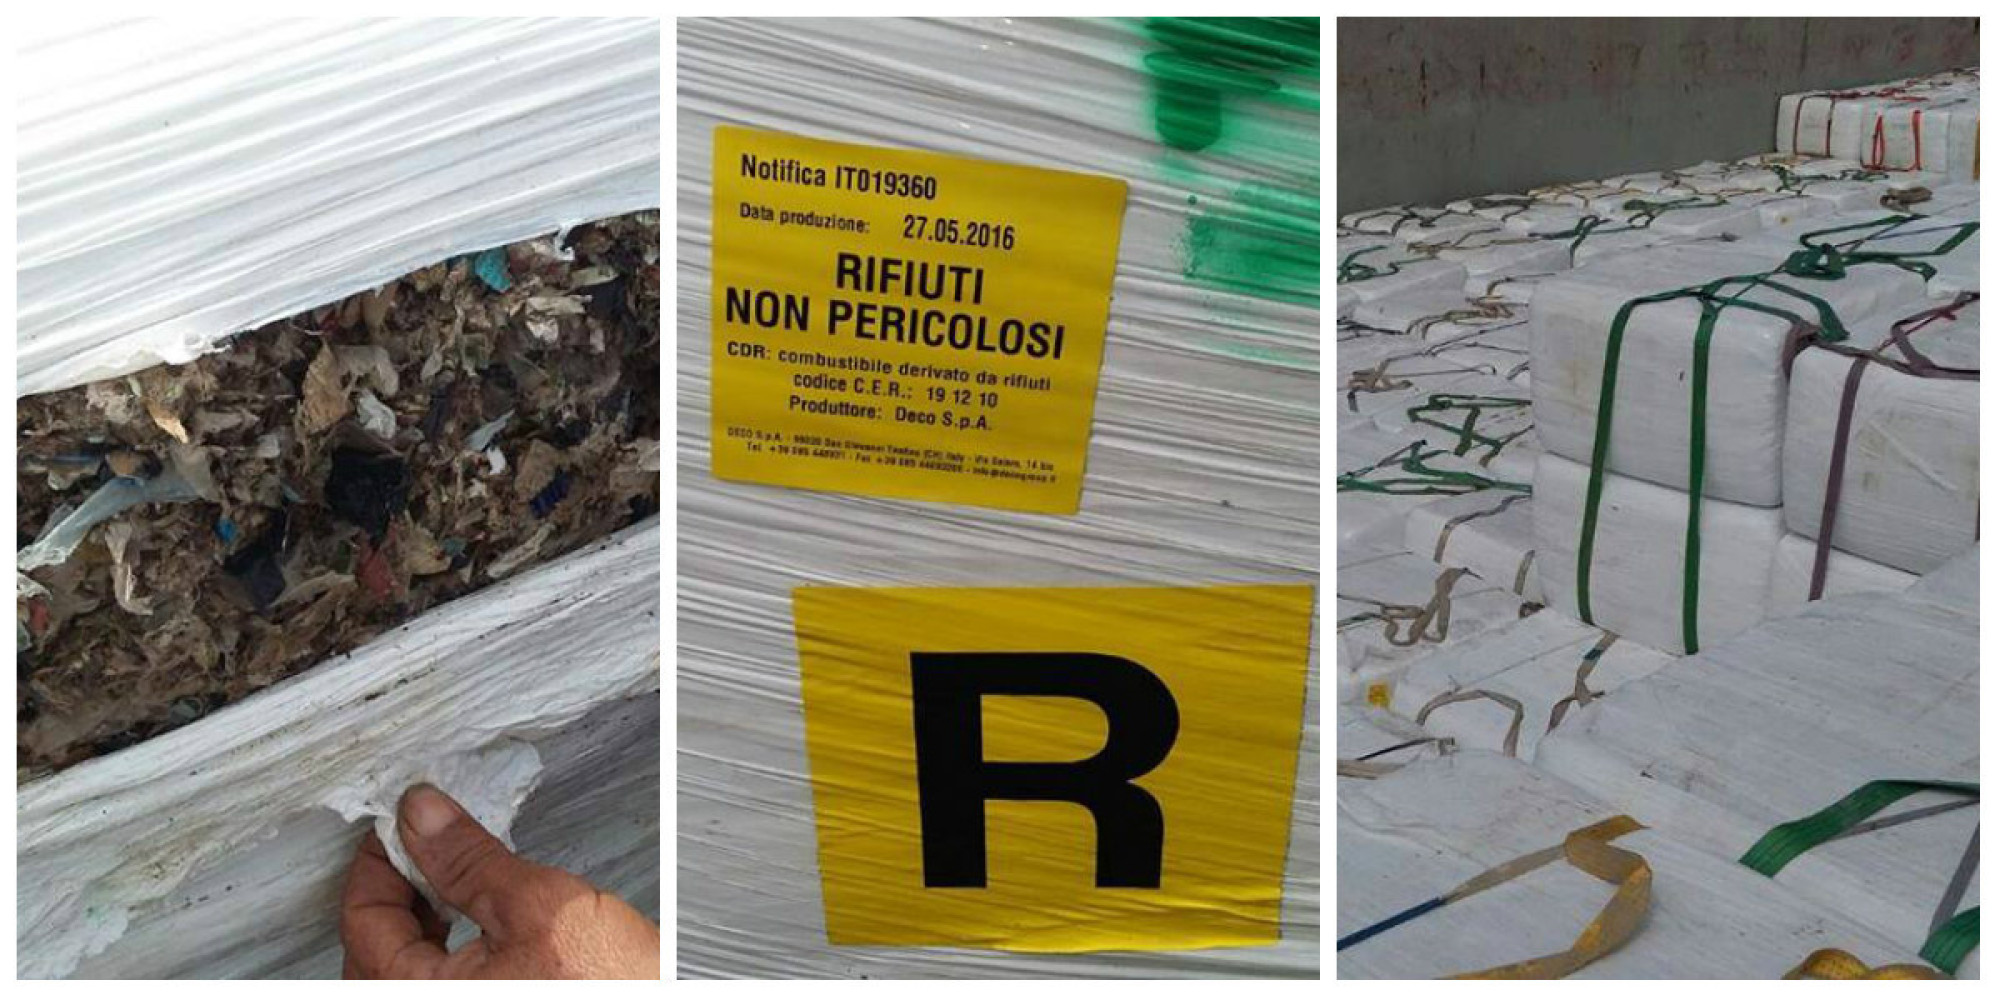 Morocco: Waste Imports From Italy Stir Controversy